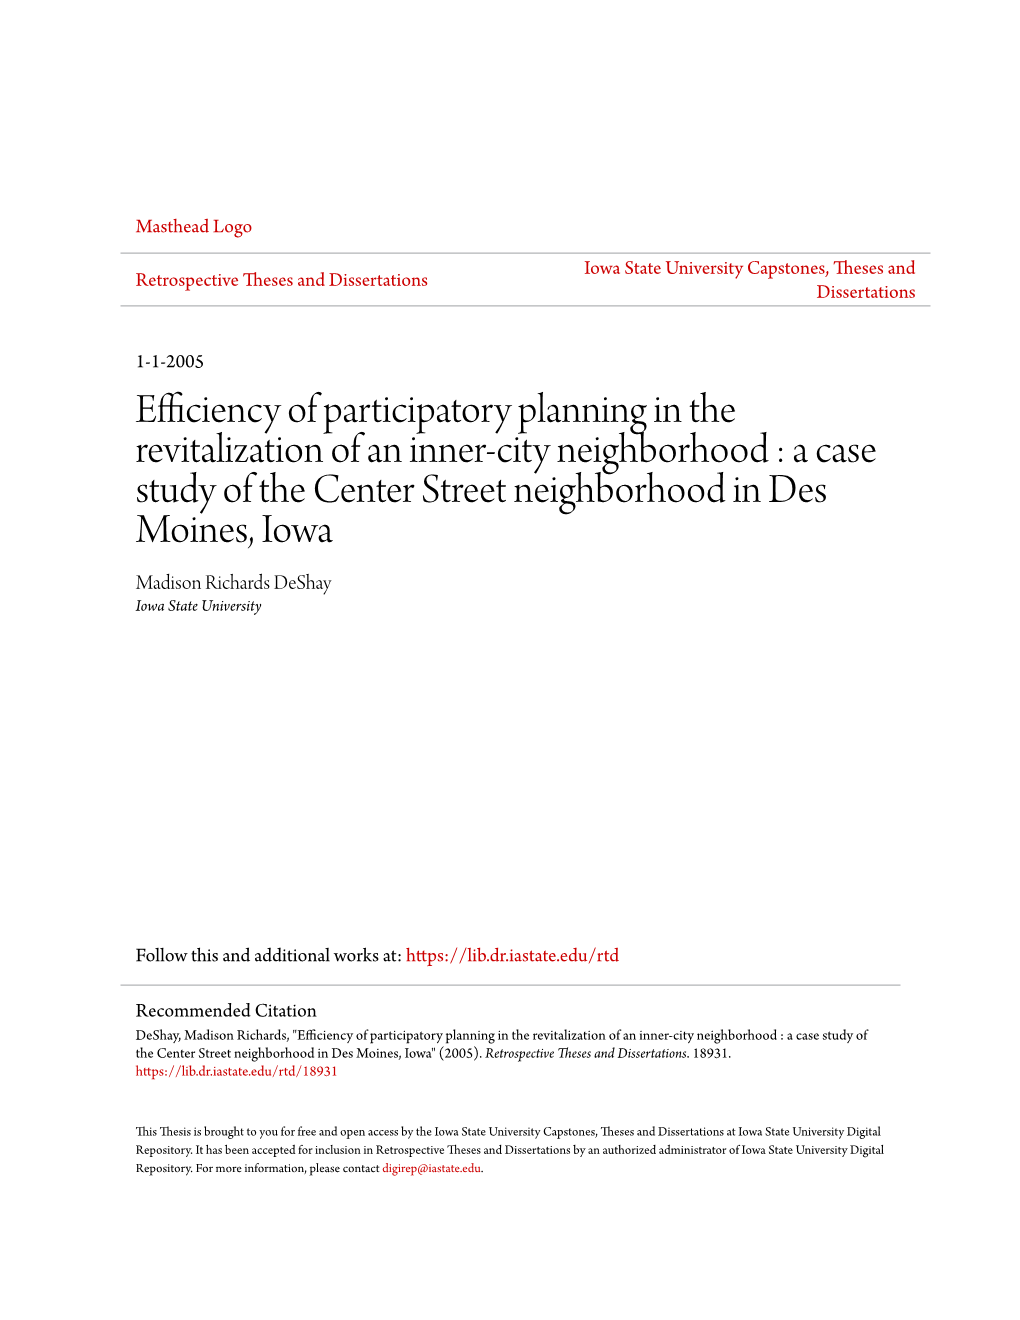 Efficiency of Participatory Planning in the Revitalization of an Inner-City